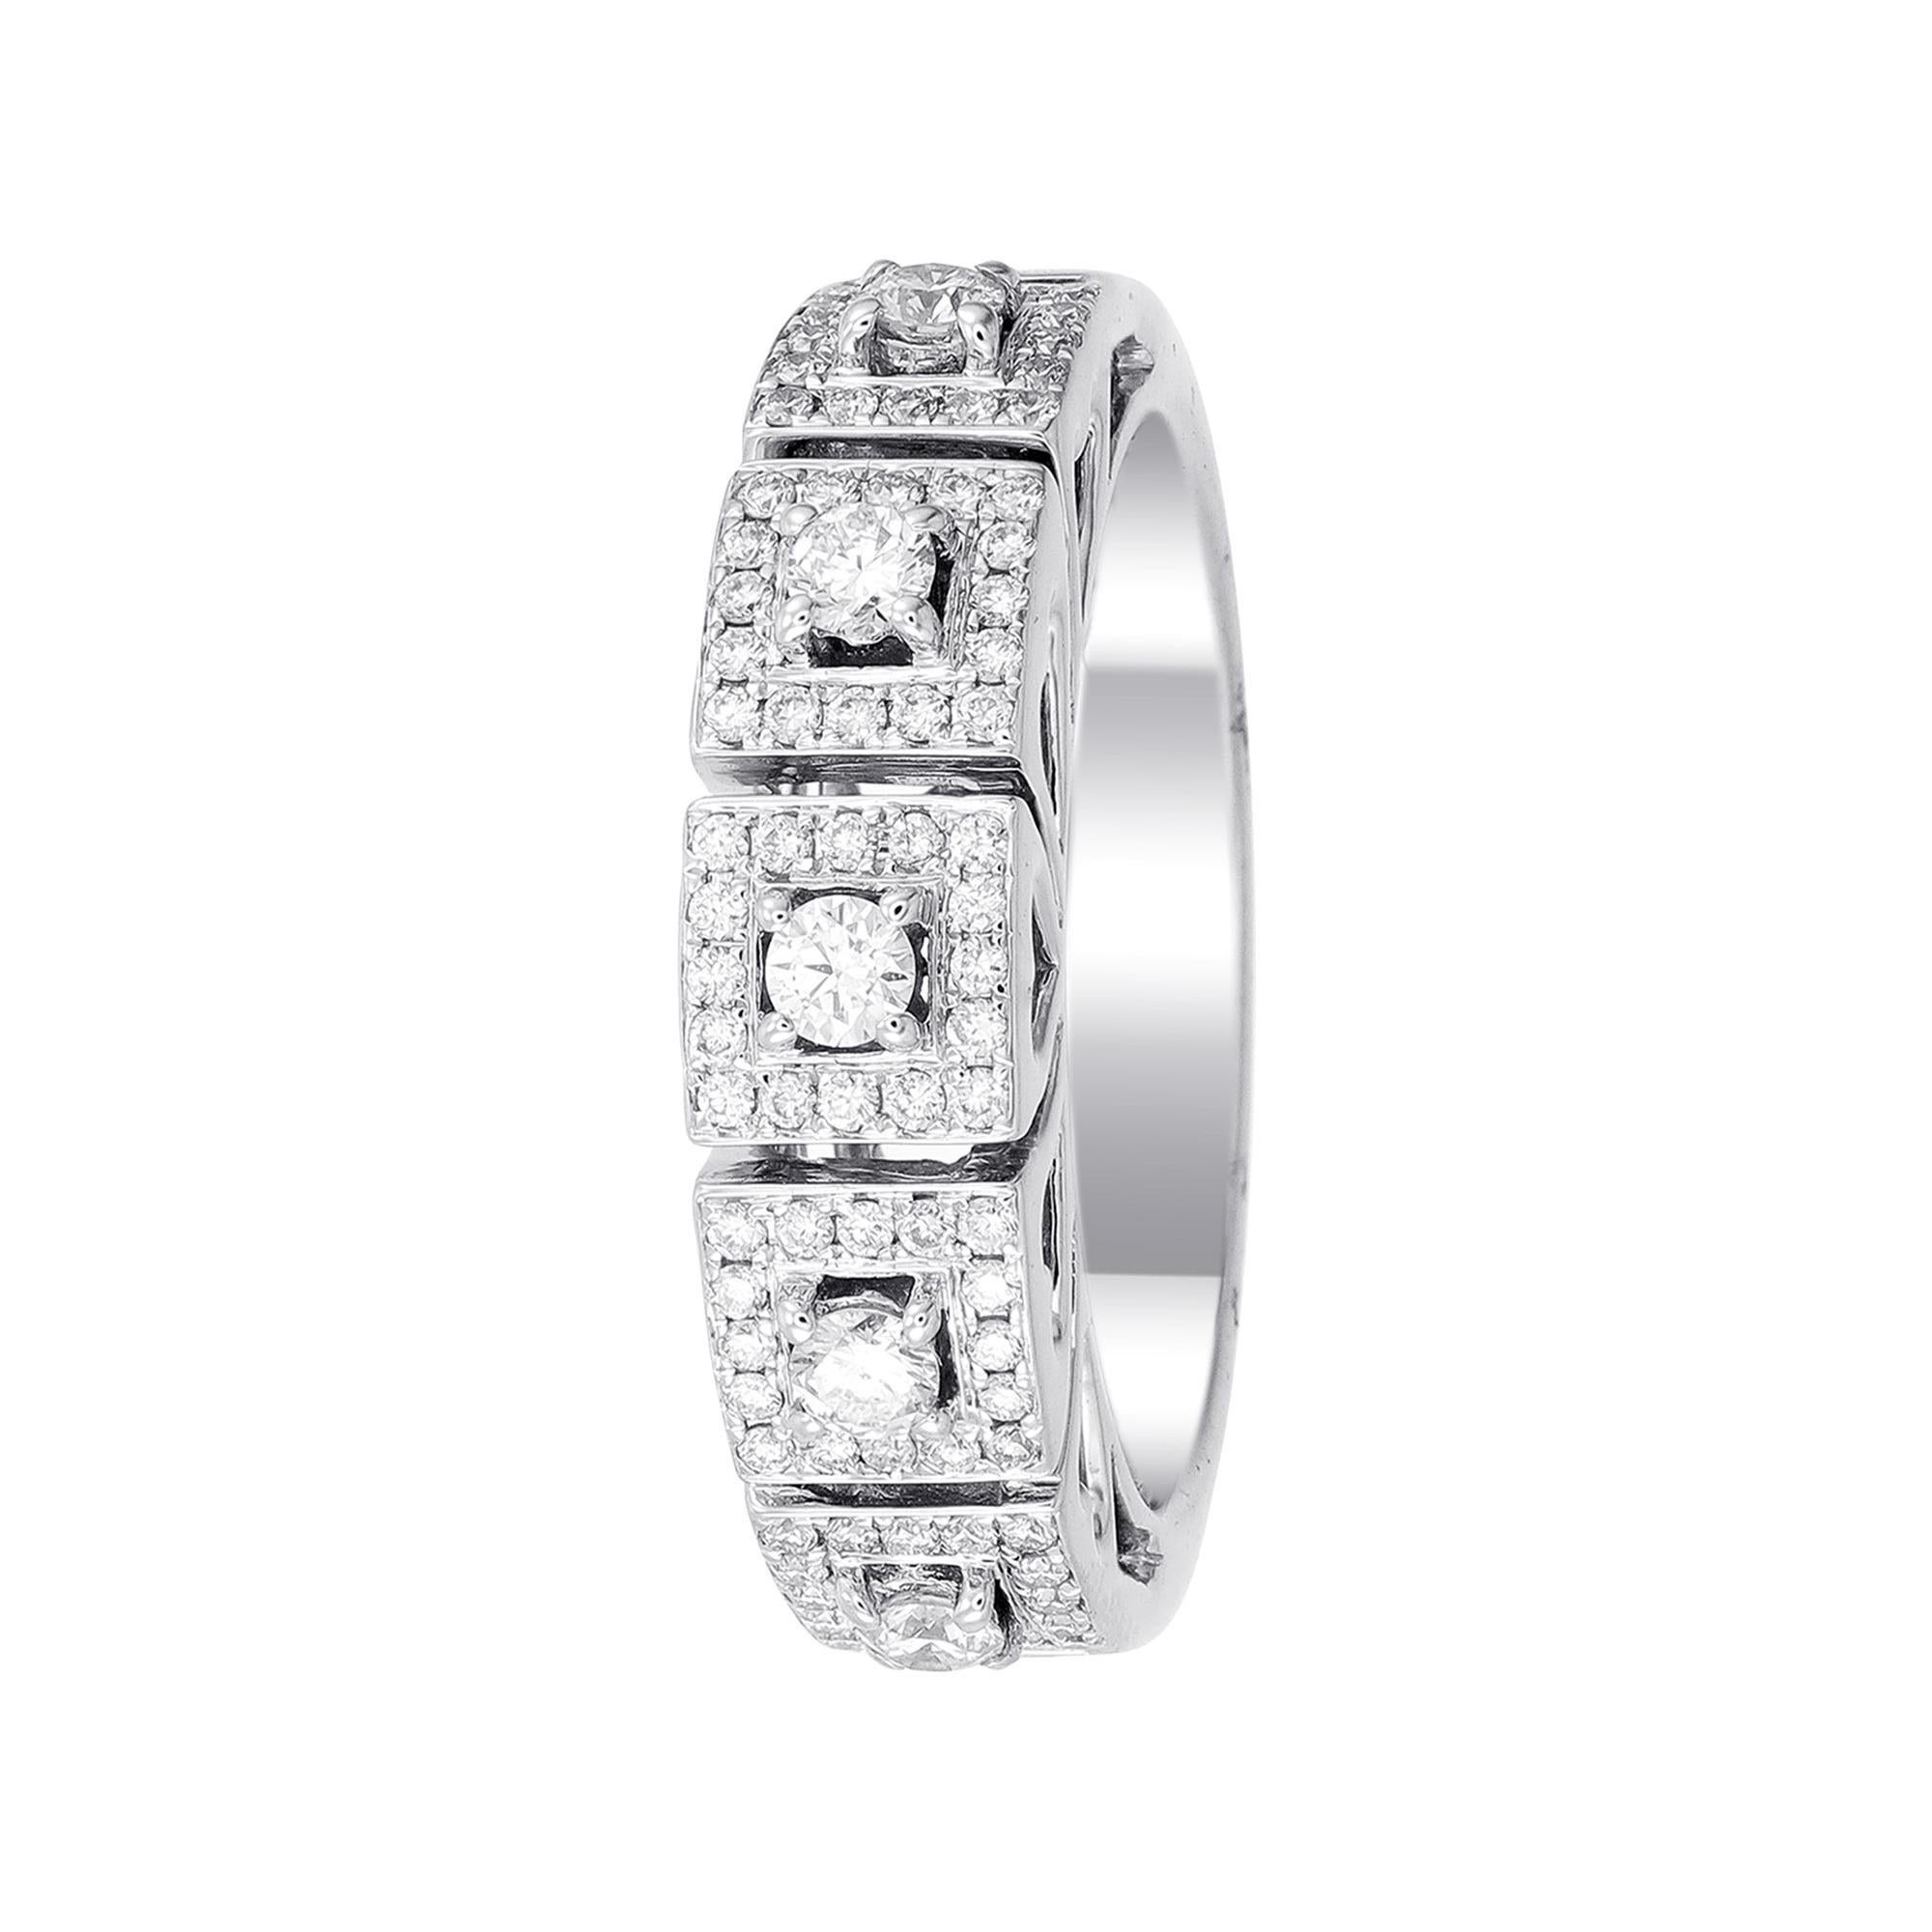 Round Diamond wedding Ring 18kt white gold , the total diamond weight of this ring is 0.52 carats.

Our diamonds are graded as G-H color and VVS-VS clarity and 100% Natural Diamond.

Please message us for custom orders for different sizes/gold